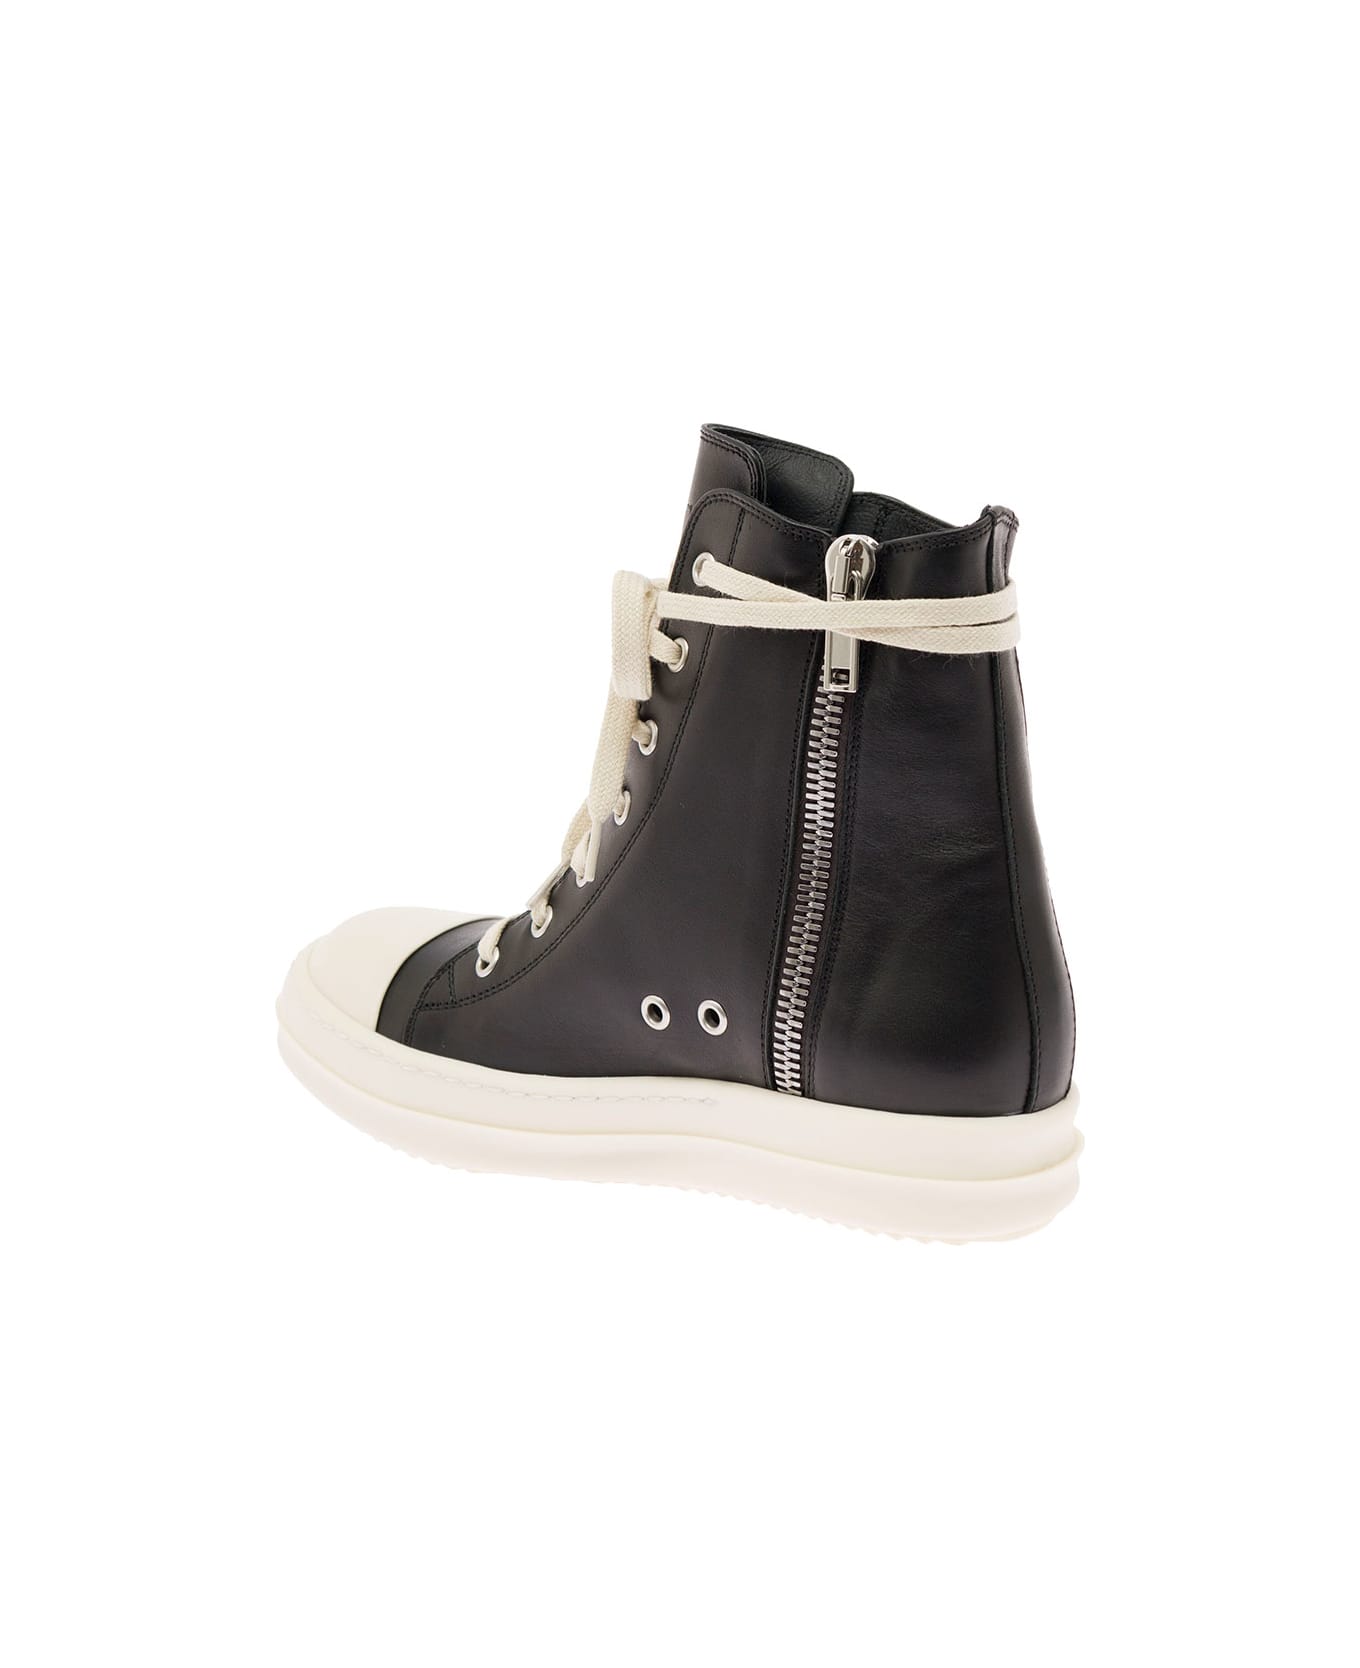 Rick Owens Woman's Black Leather  Sneakers With Laces - Black